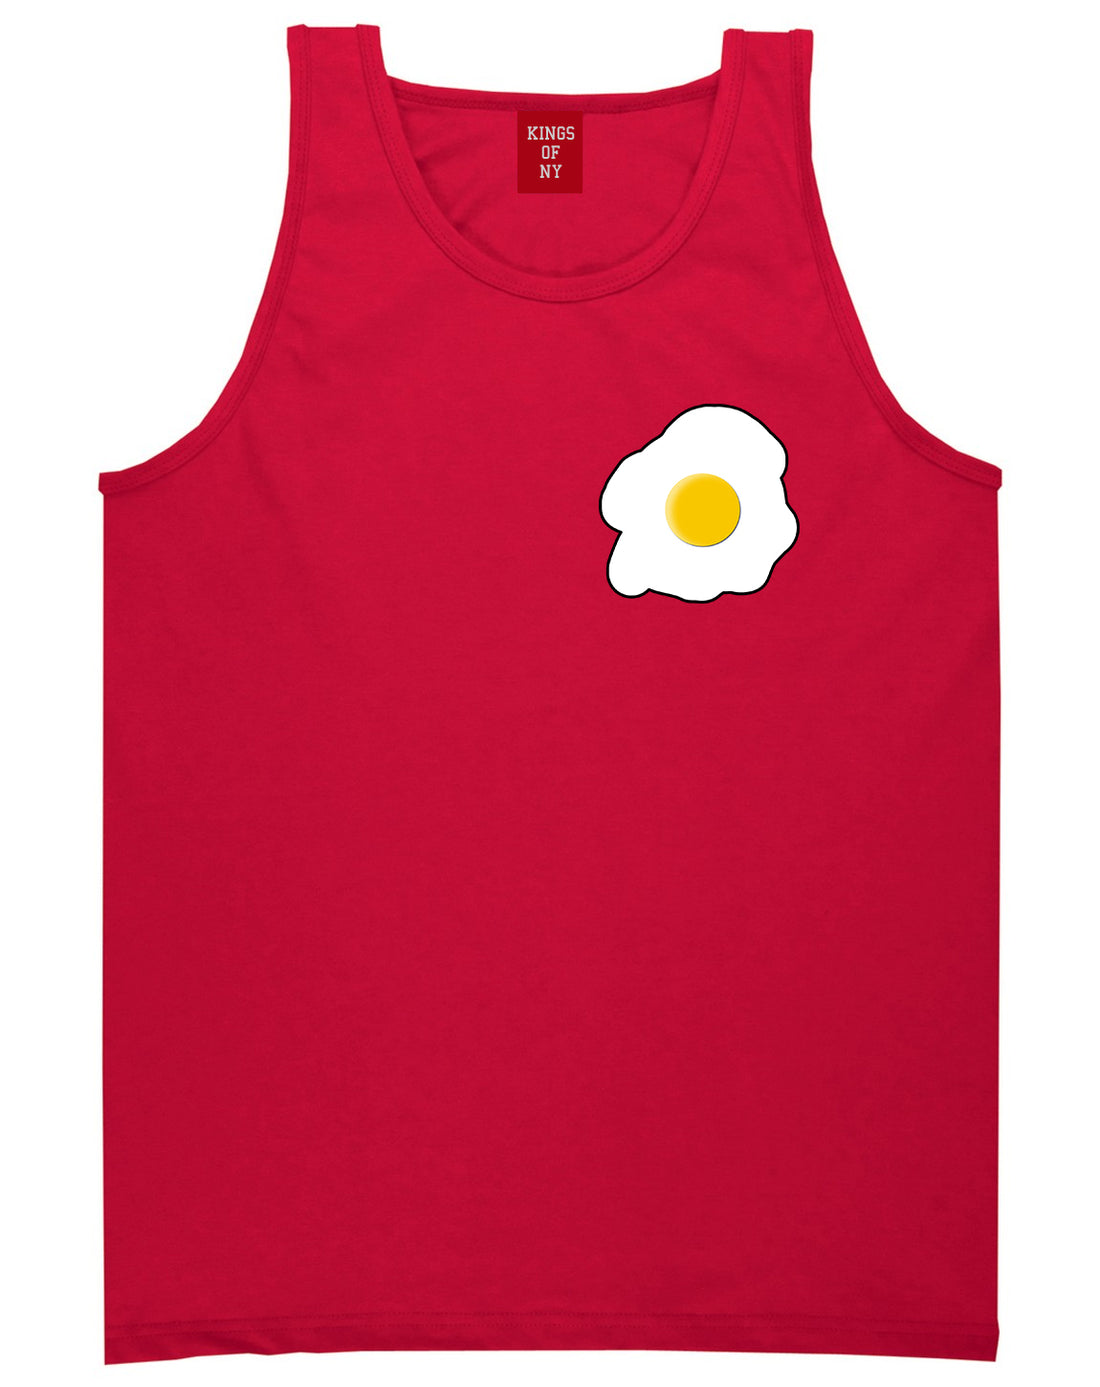 Fried Egg Breakfast Chest Mens Red Tank Top Shirt by KINGS OF NY